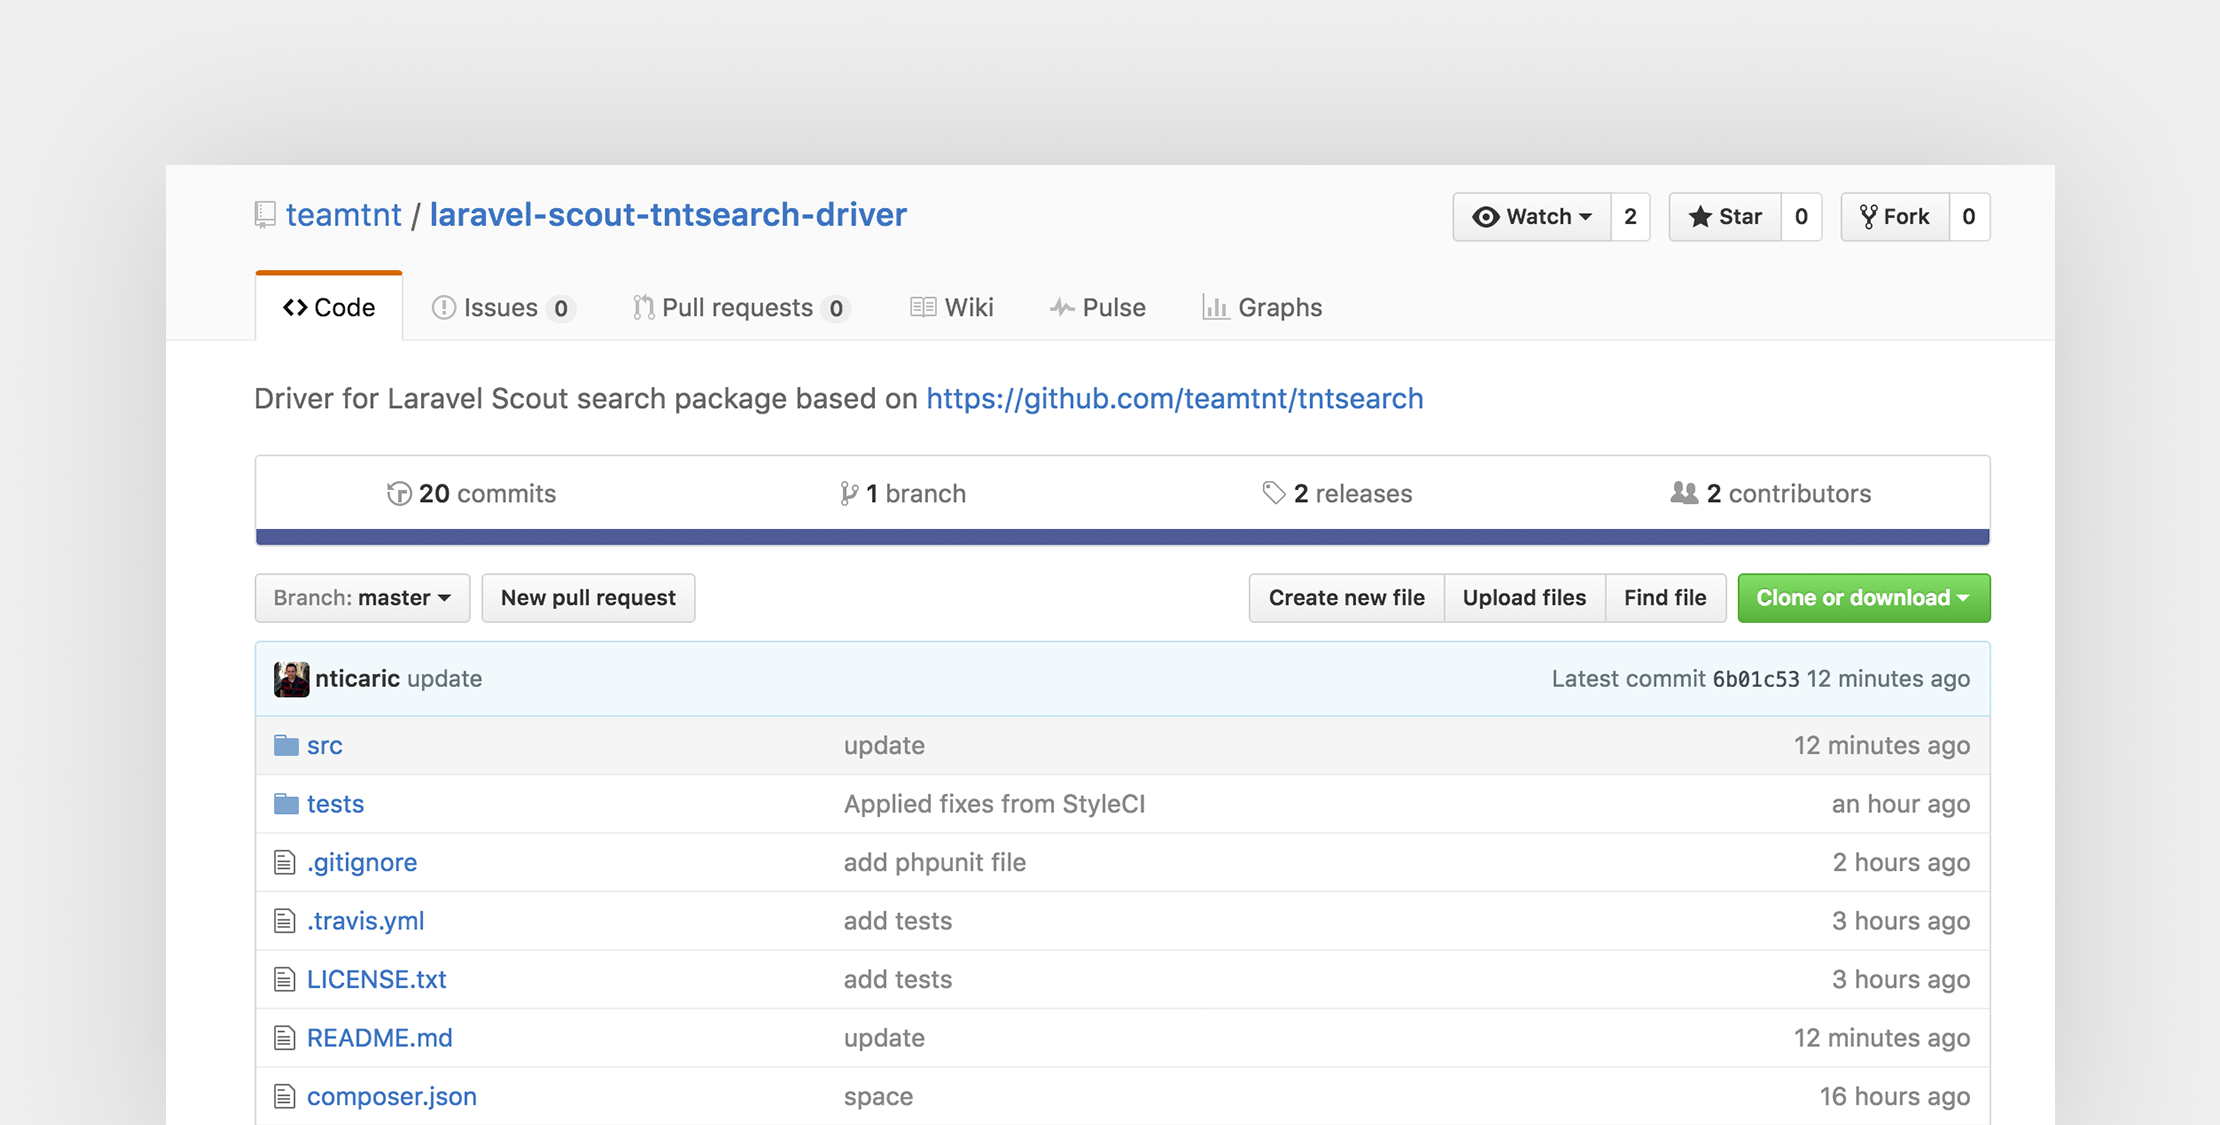 TNTSearch Driver is now available for Laravel Scout image